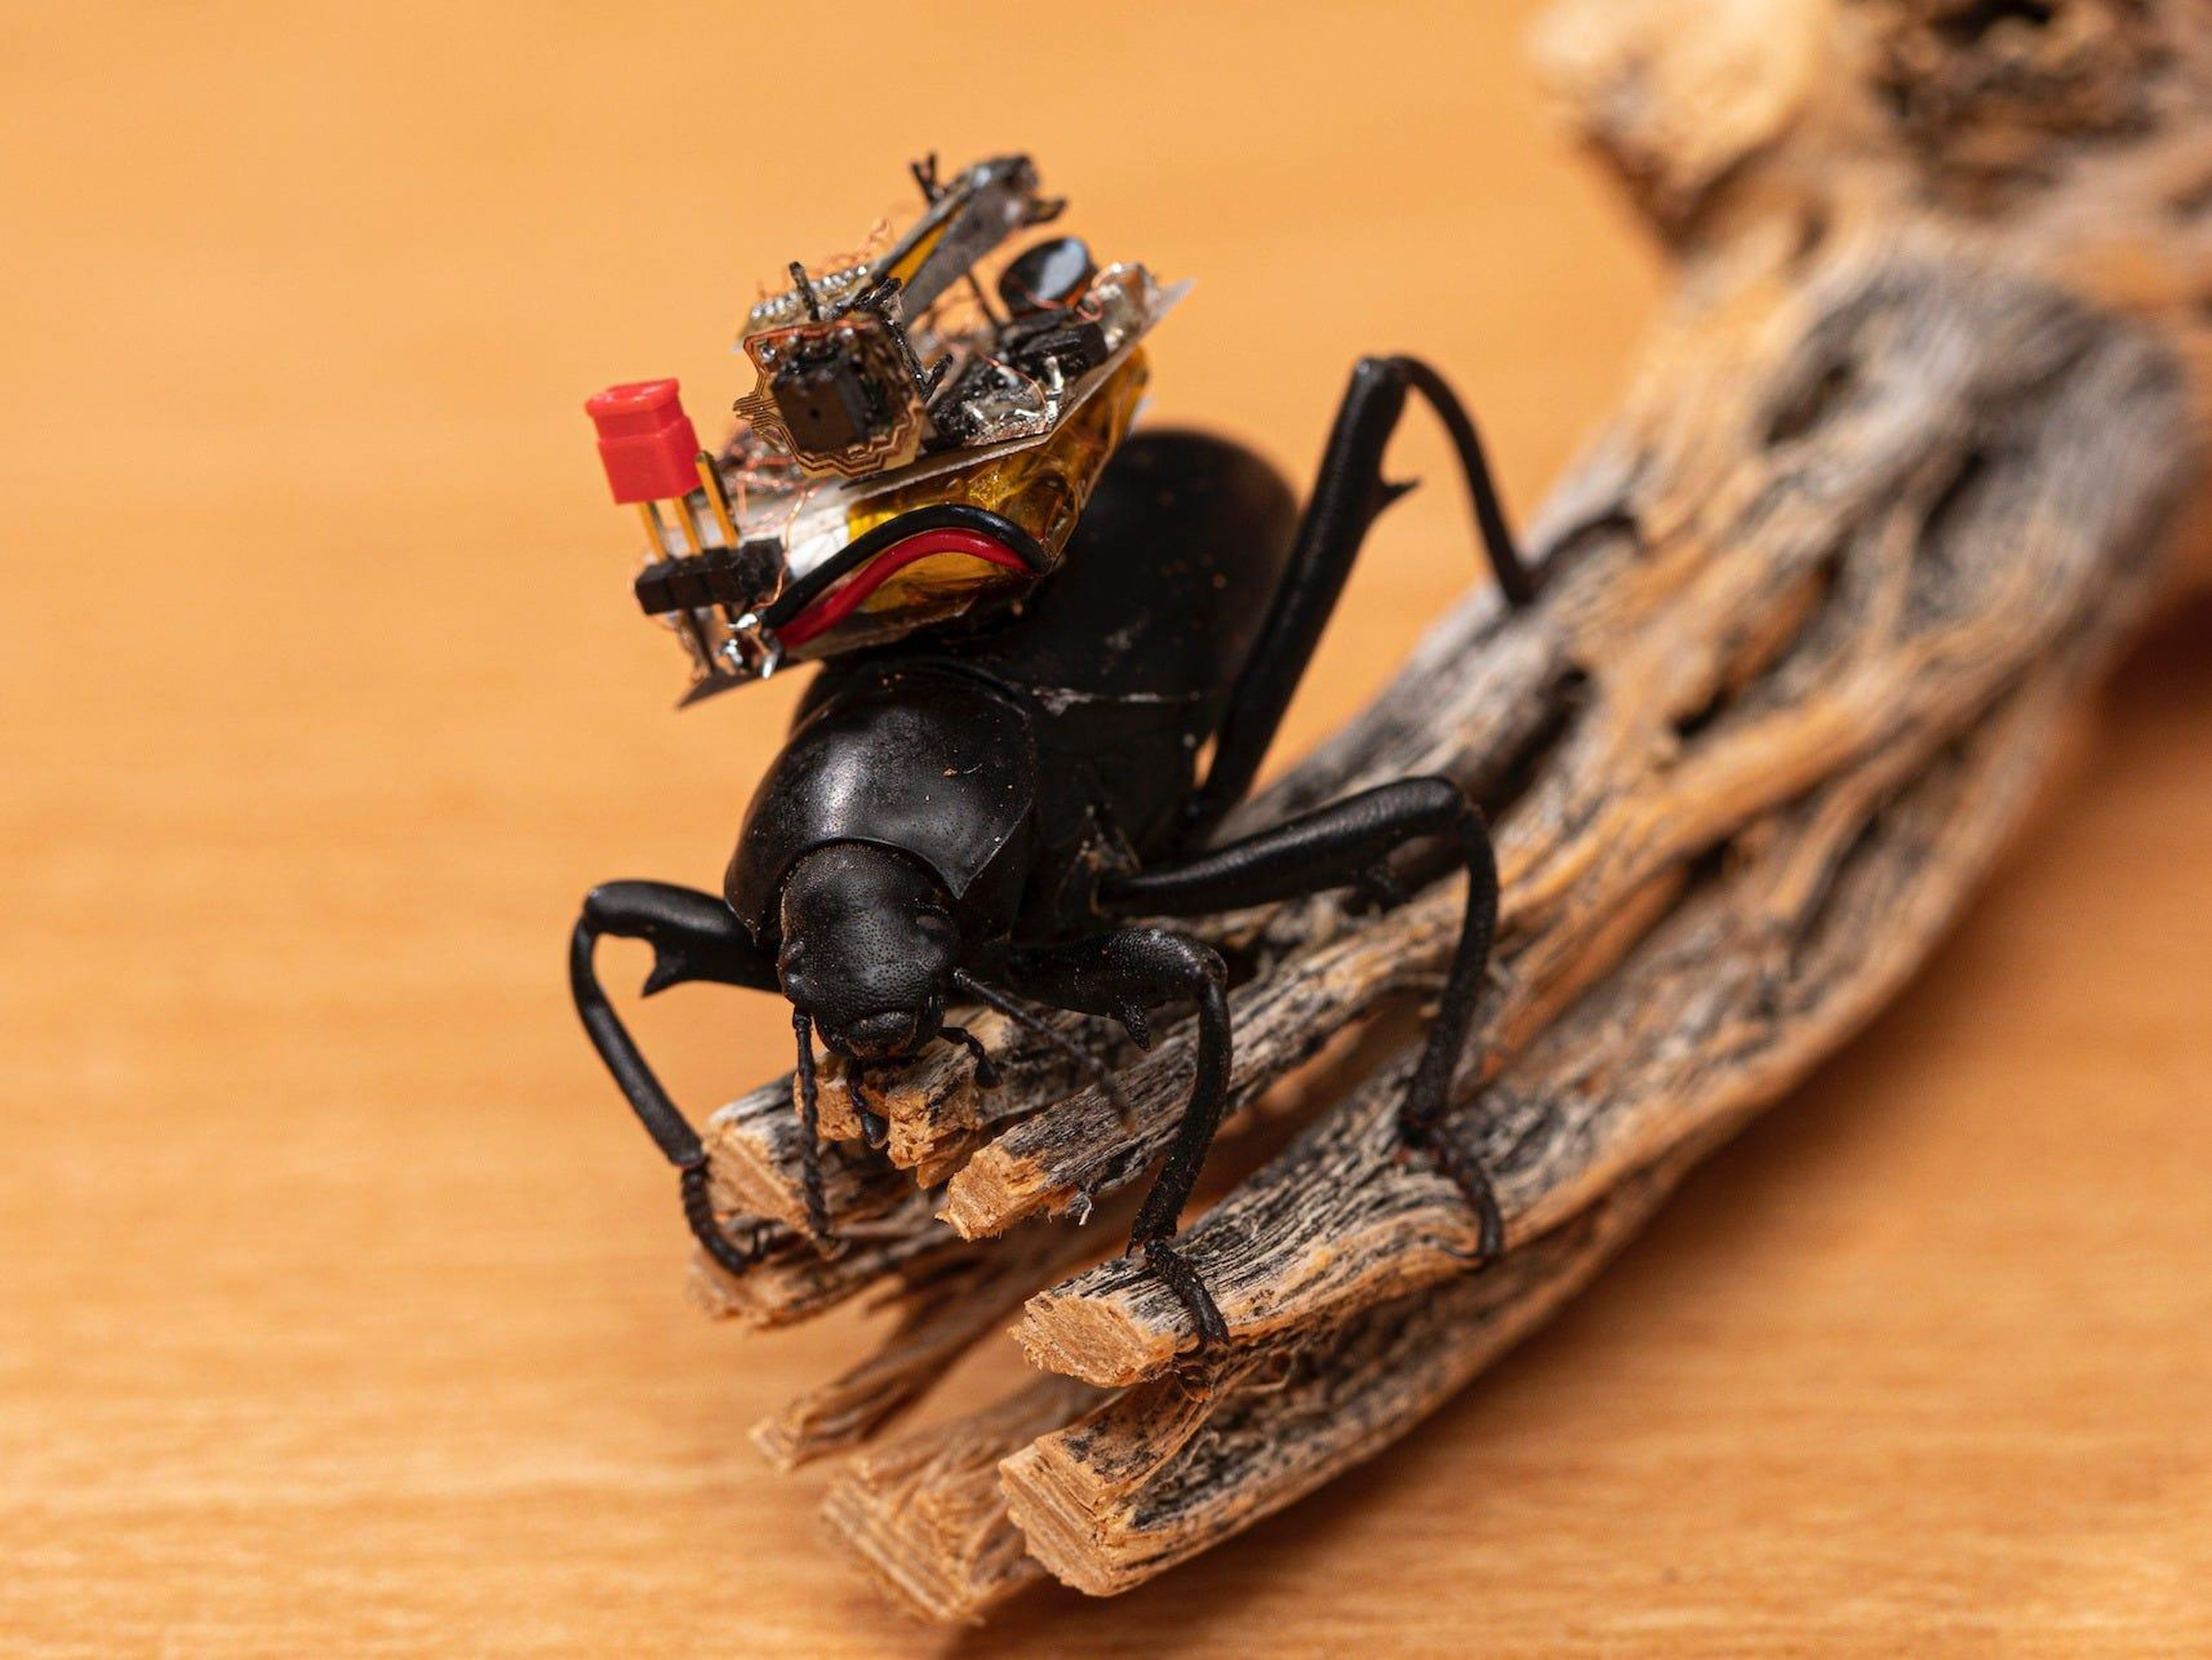 Scientists successfully put tiny GoPro-style wireless cameras on beetles, and it's paving the way for miniature robots